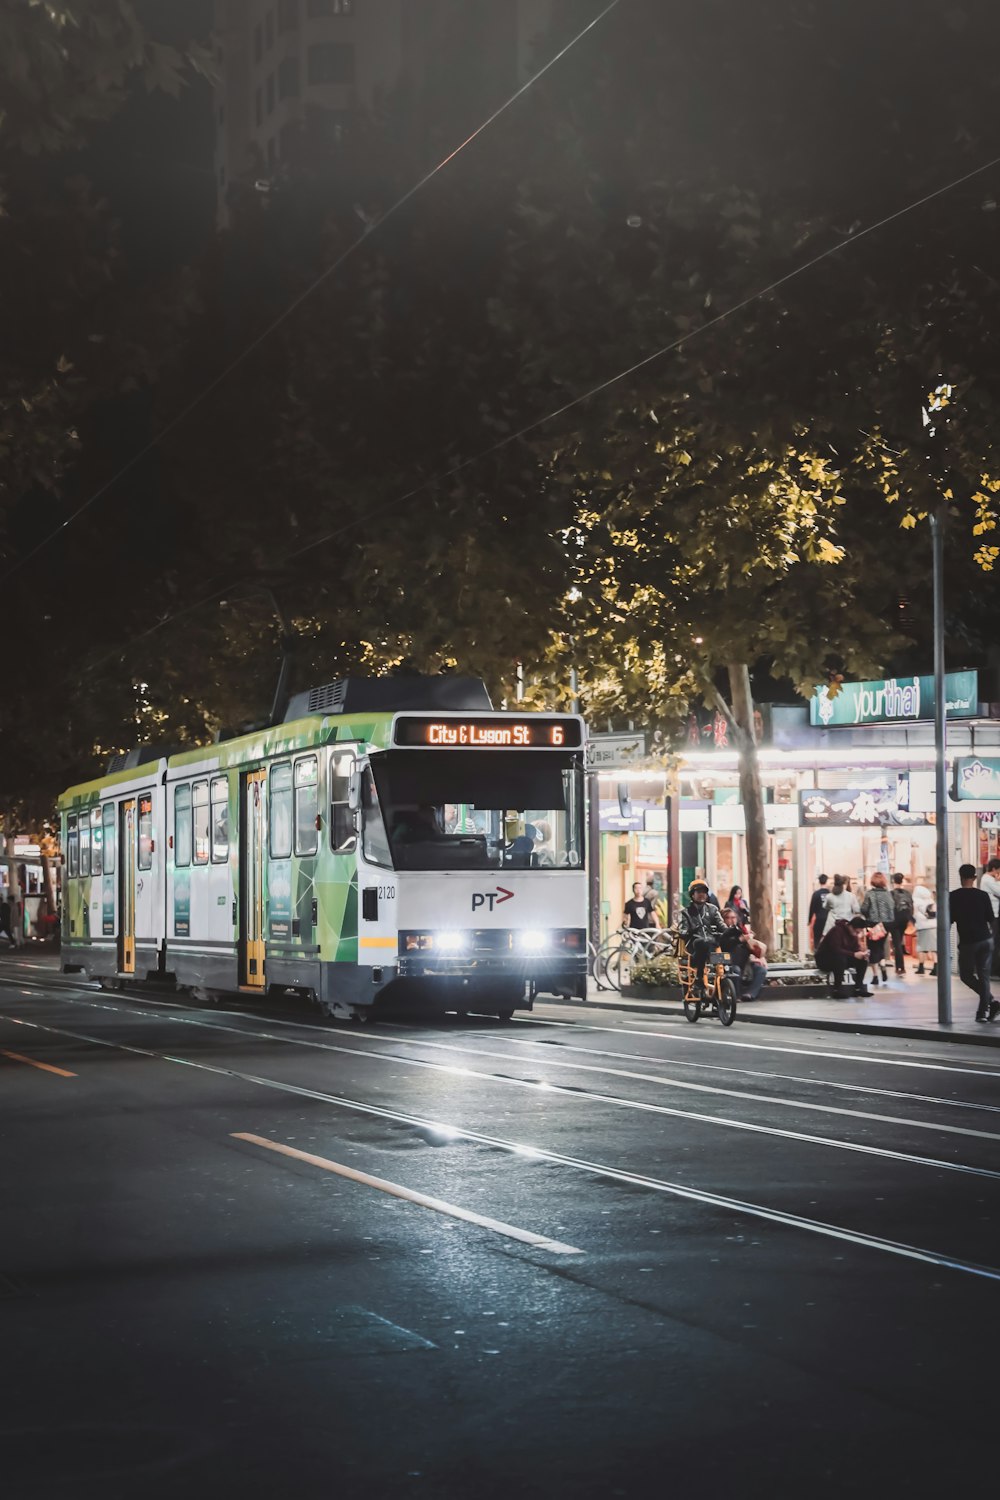 people walking on street near green and white tram during night time